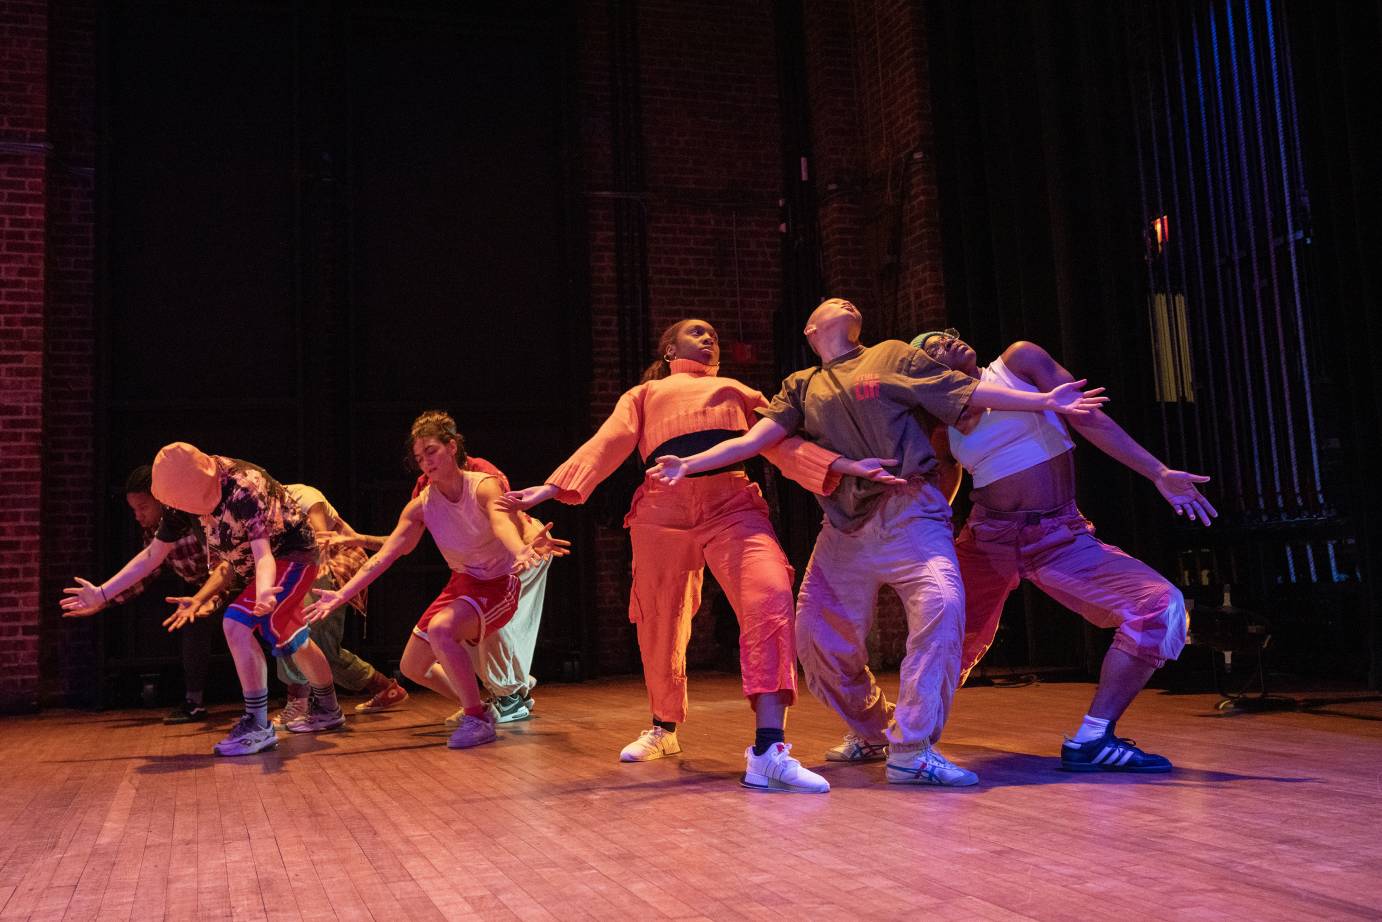 Two groups of young dancers in colorful street gear share the stage. The first group leans forward towards the floor with arms streched in front of them. The second group, a trio, leans into a back-bend as a group, they support one another with their arms and torsos while their legs are bent.